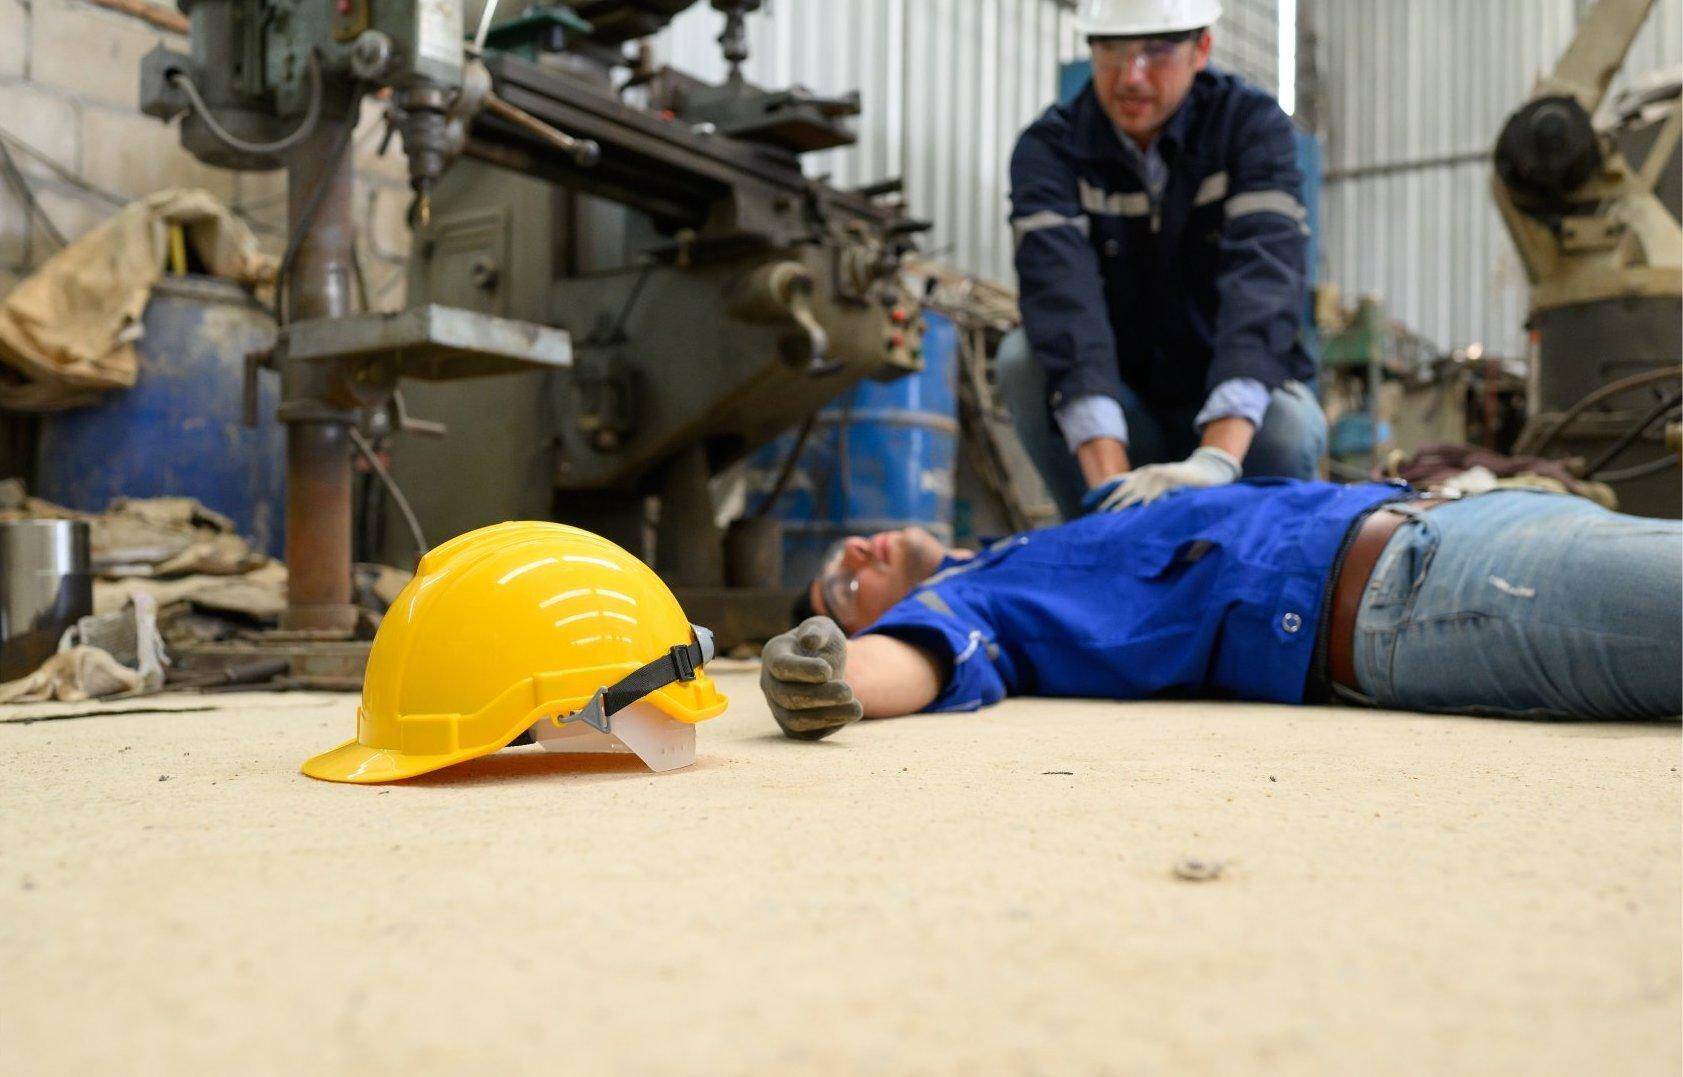 An unconscious man who has been injured on the job who will file for workers compensation in Suwanee, Georgia